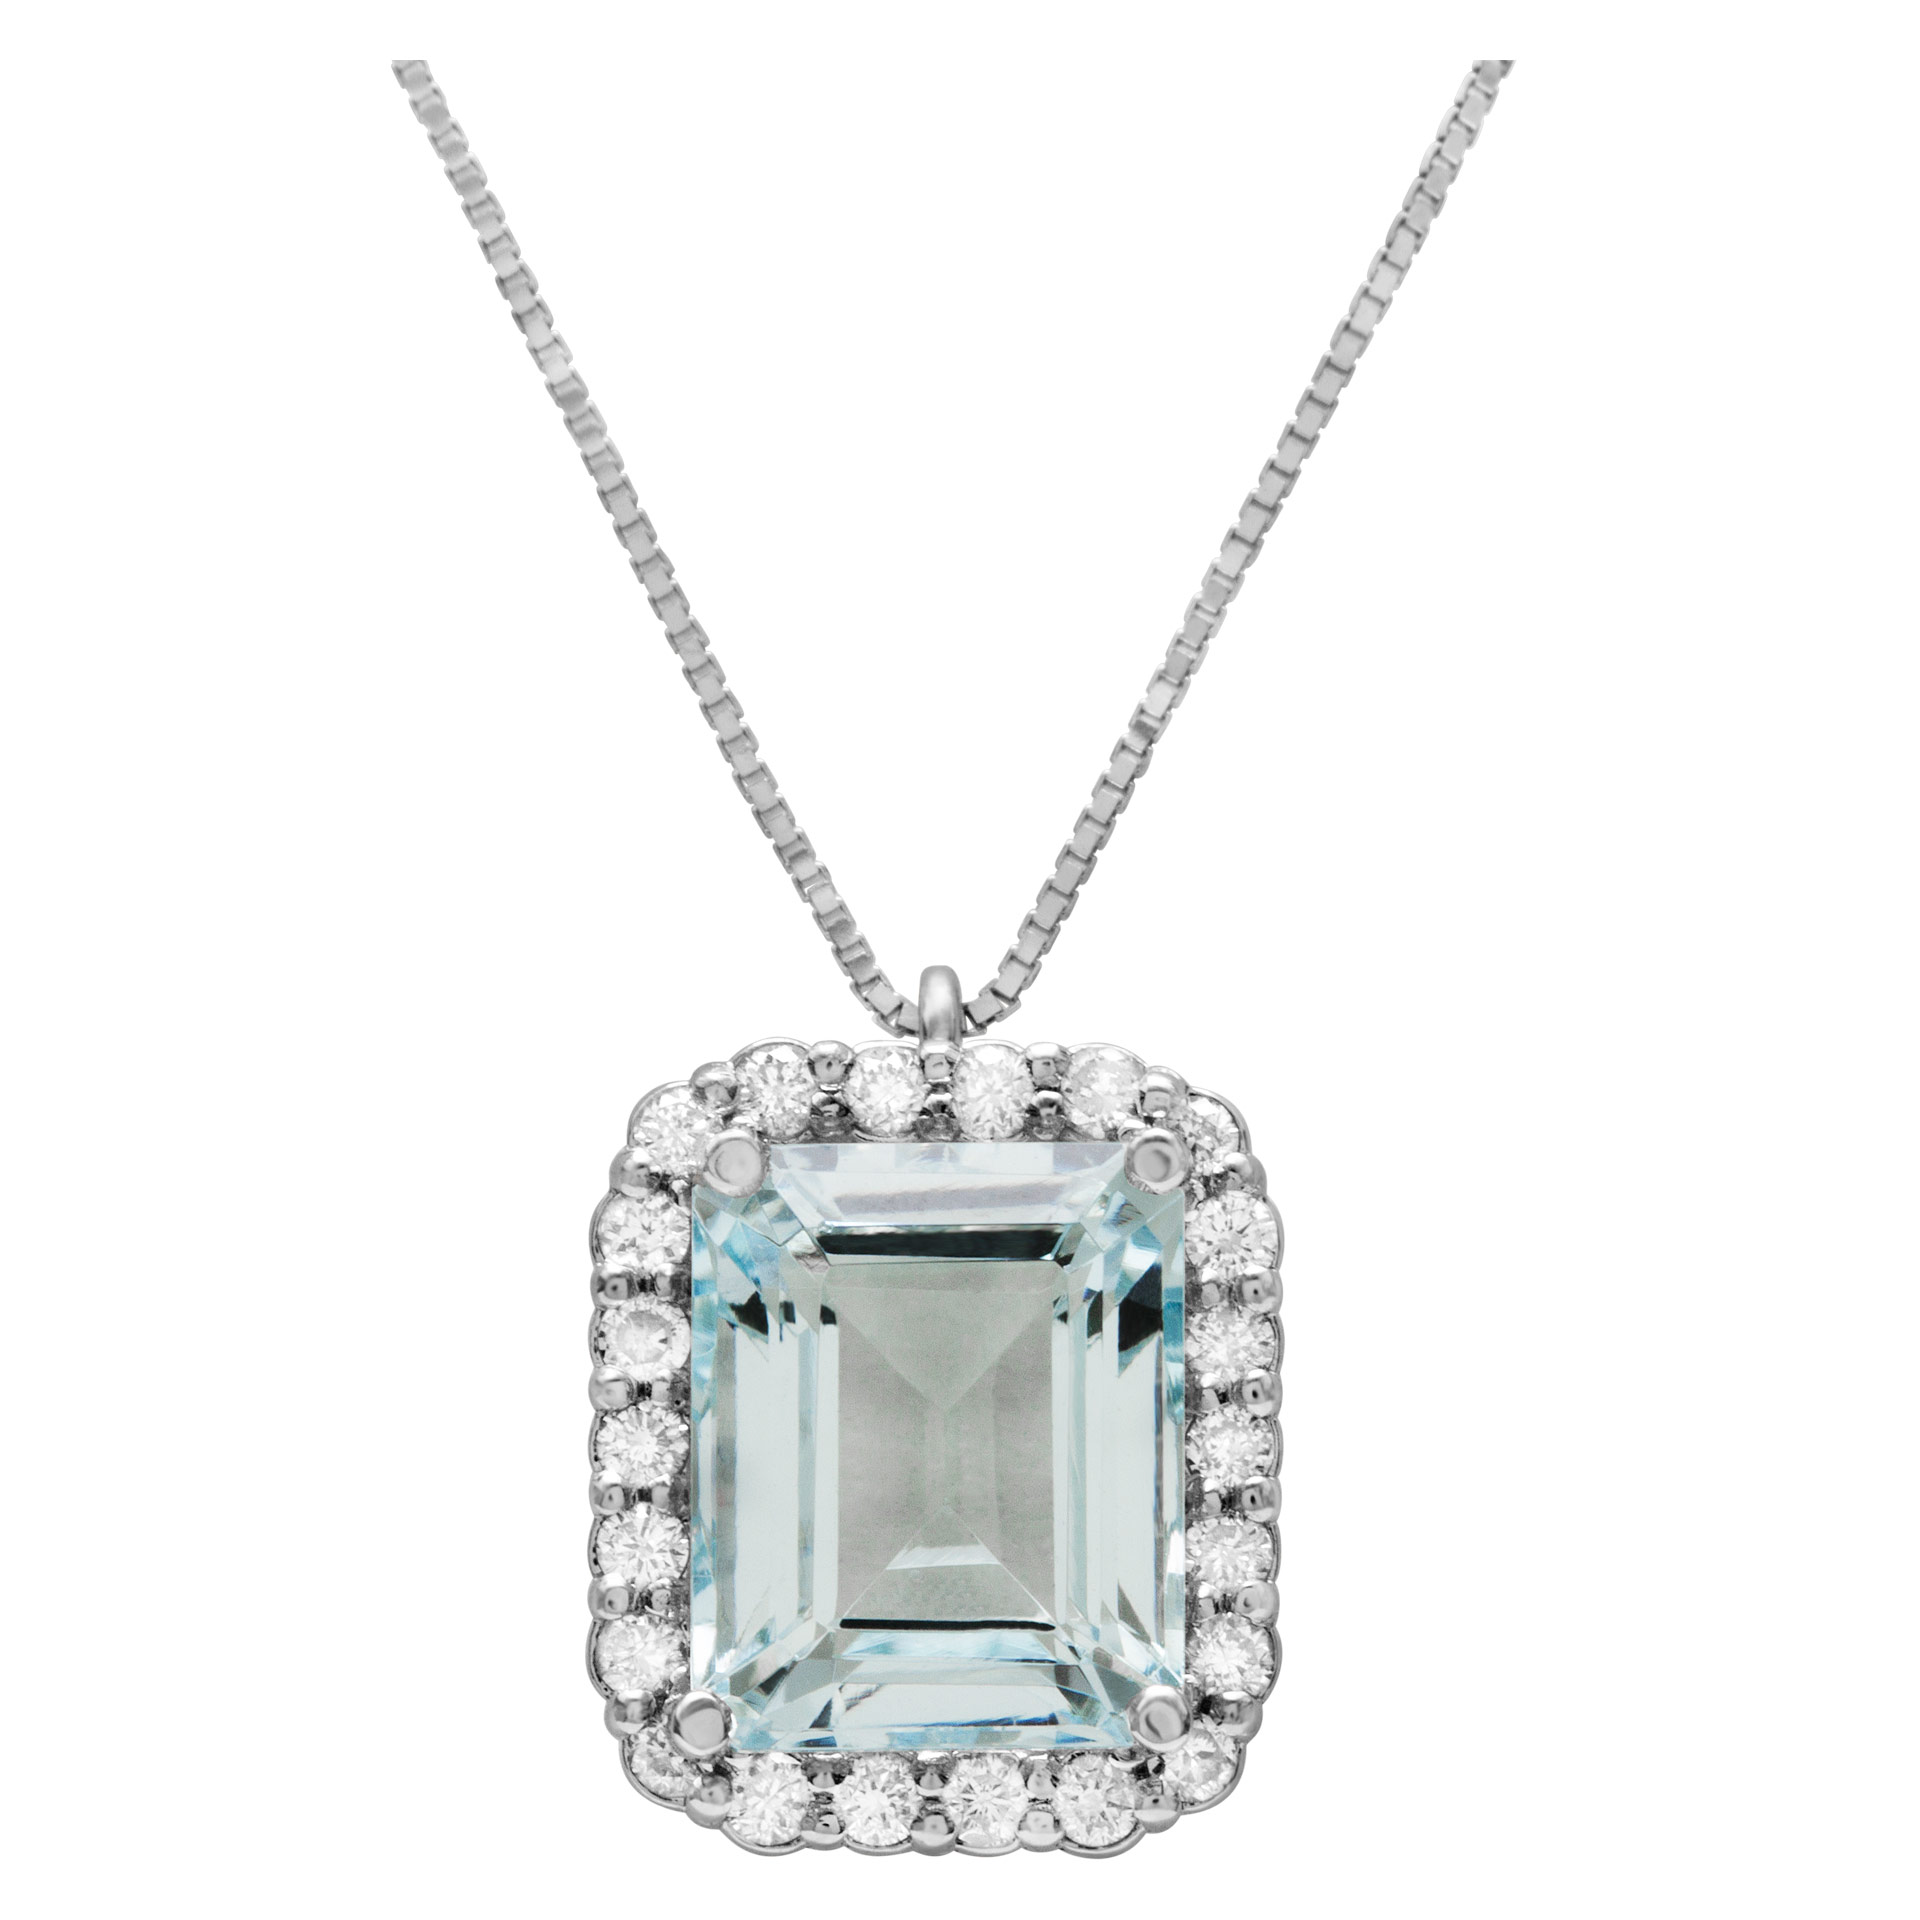 Aquamarine pendant with diamond accents 0.33 cts in 18k w/g image 1